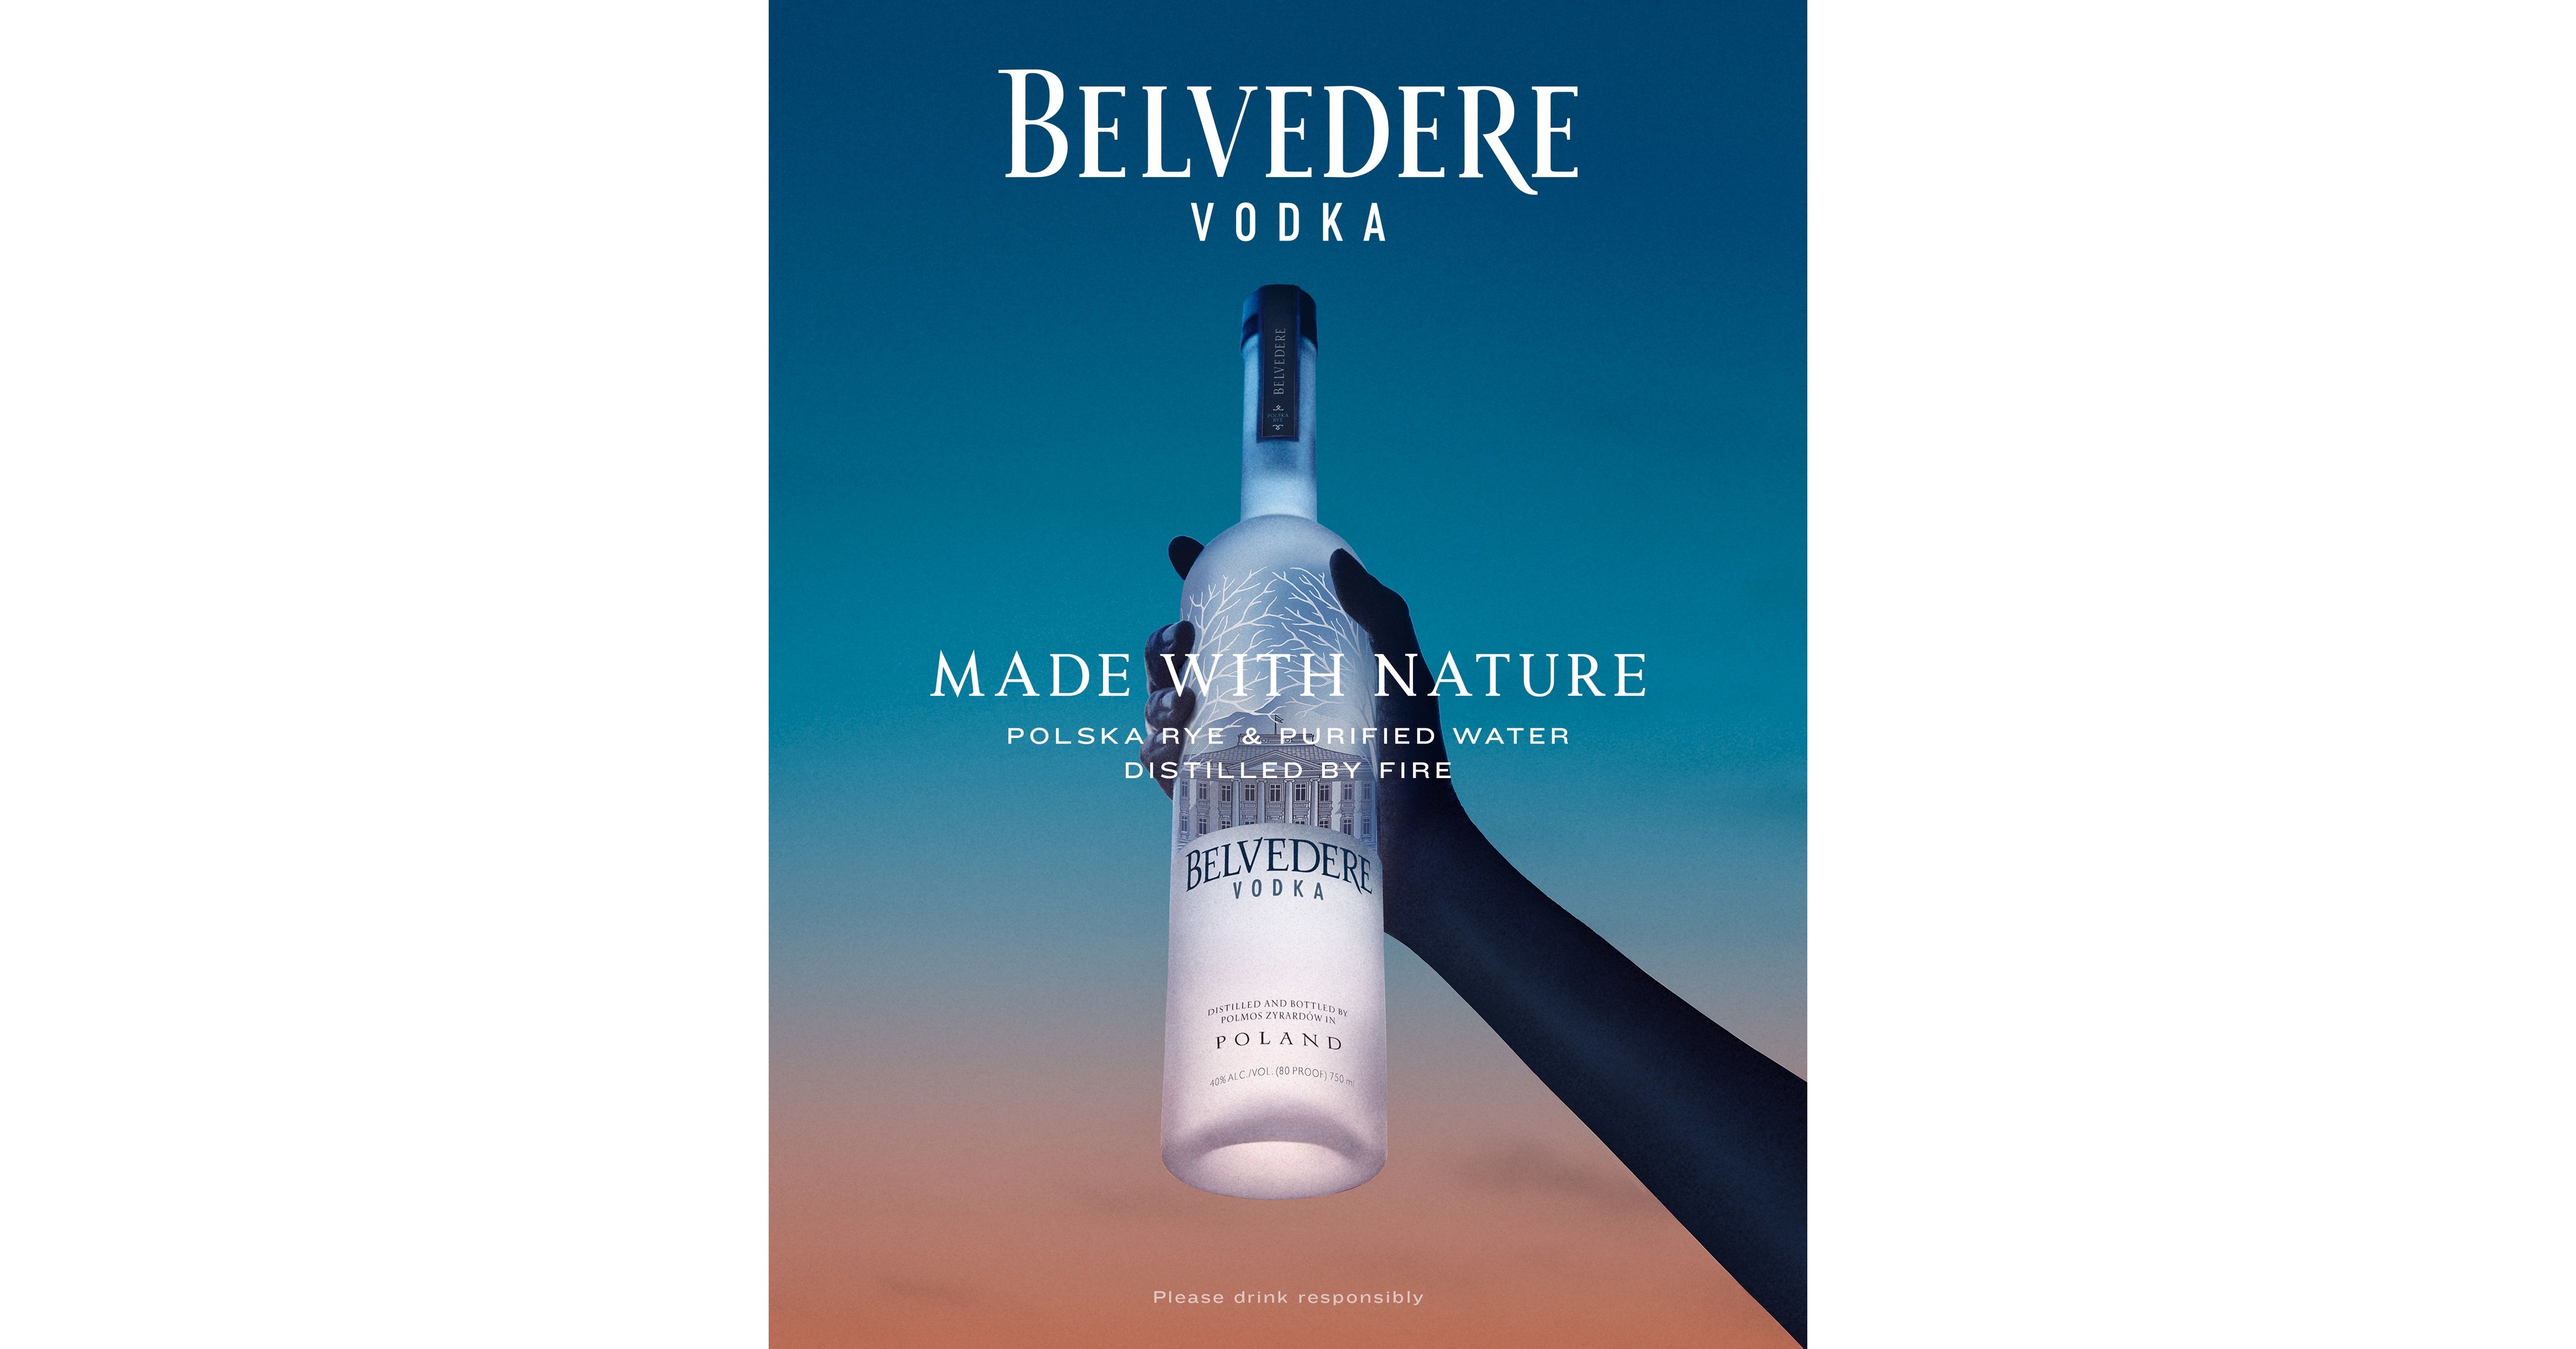 Belvedere launches 'Made With Nature' platform - Brand Wagon News